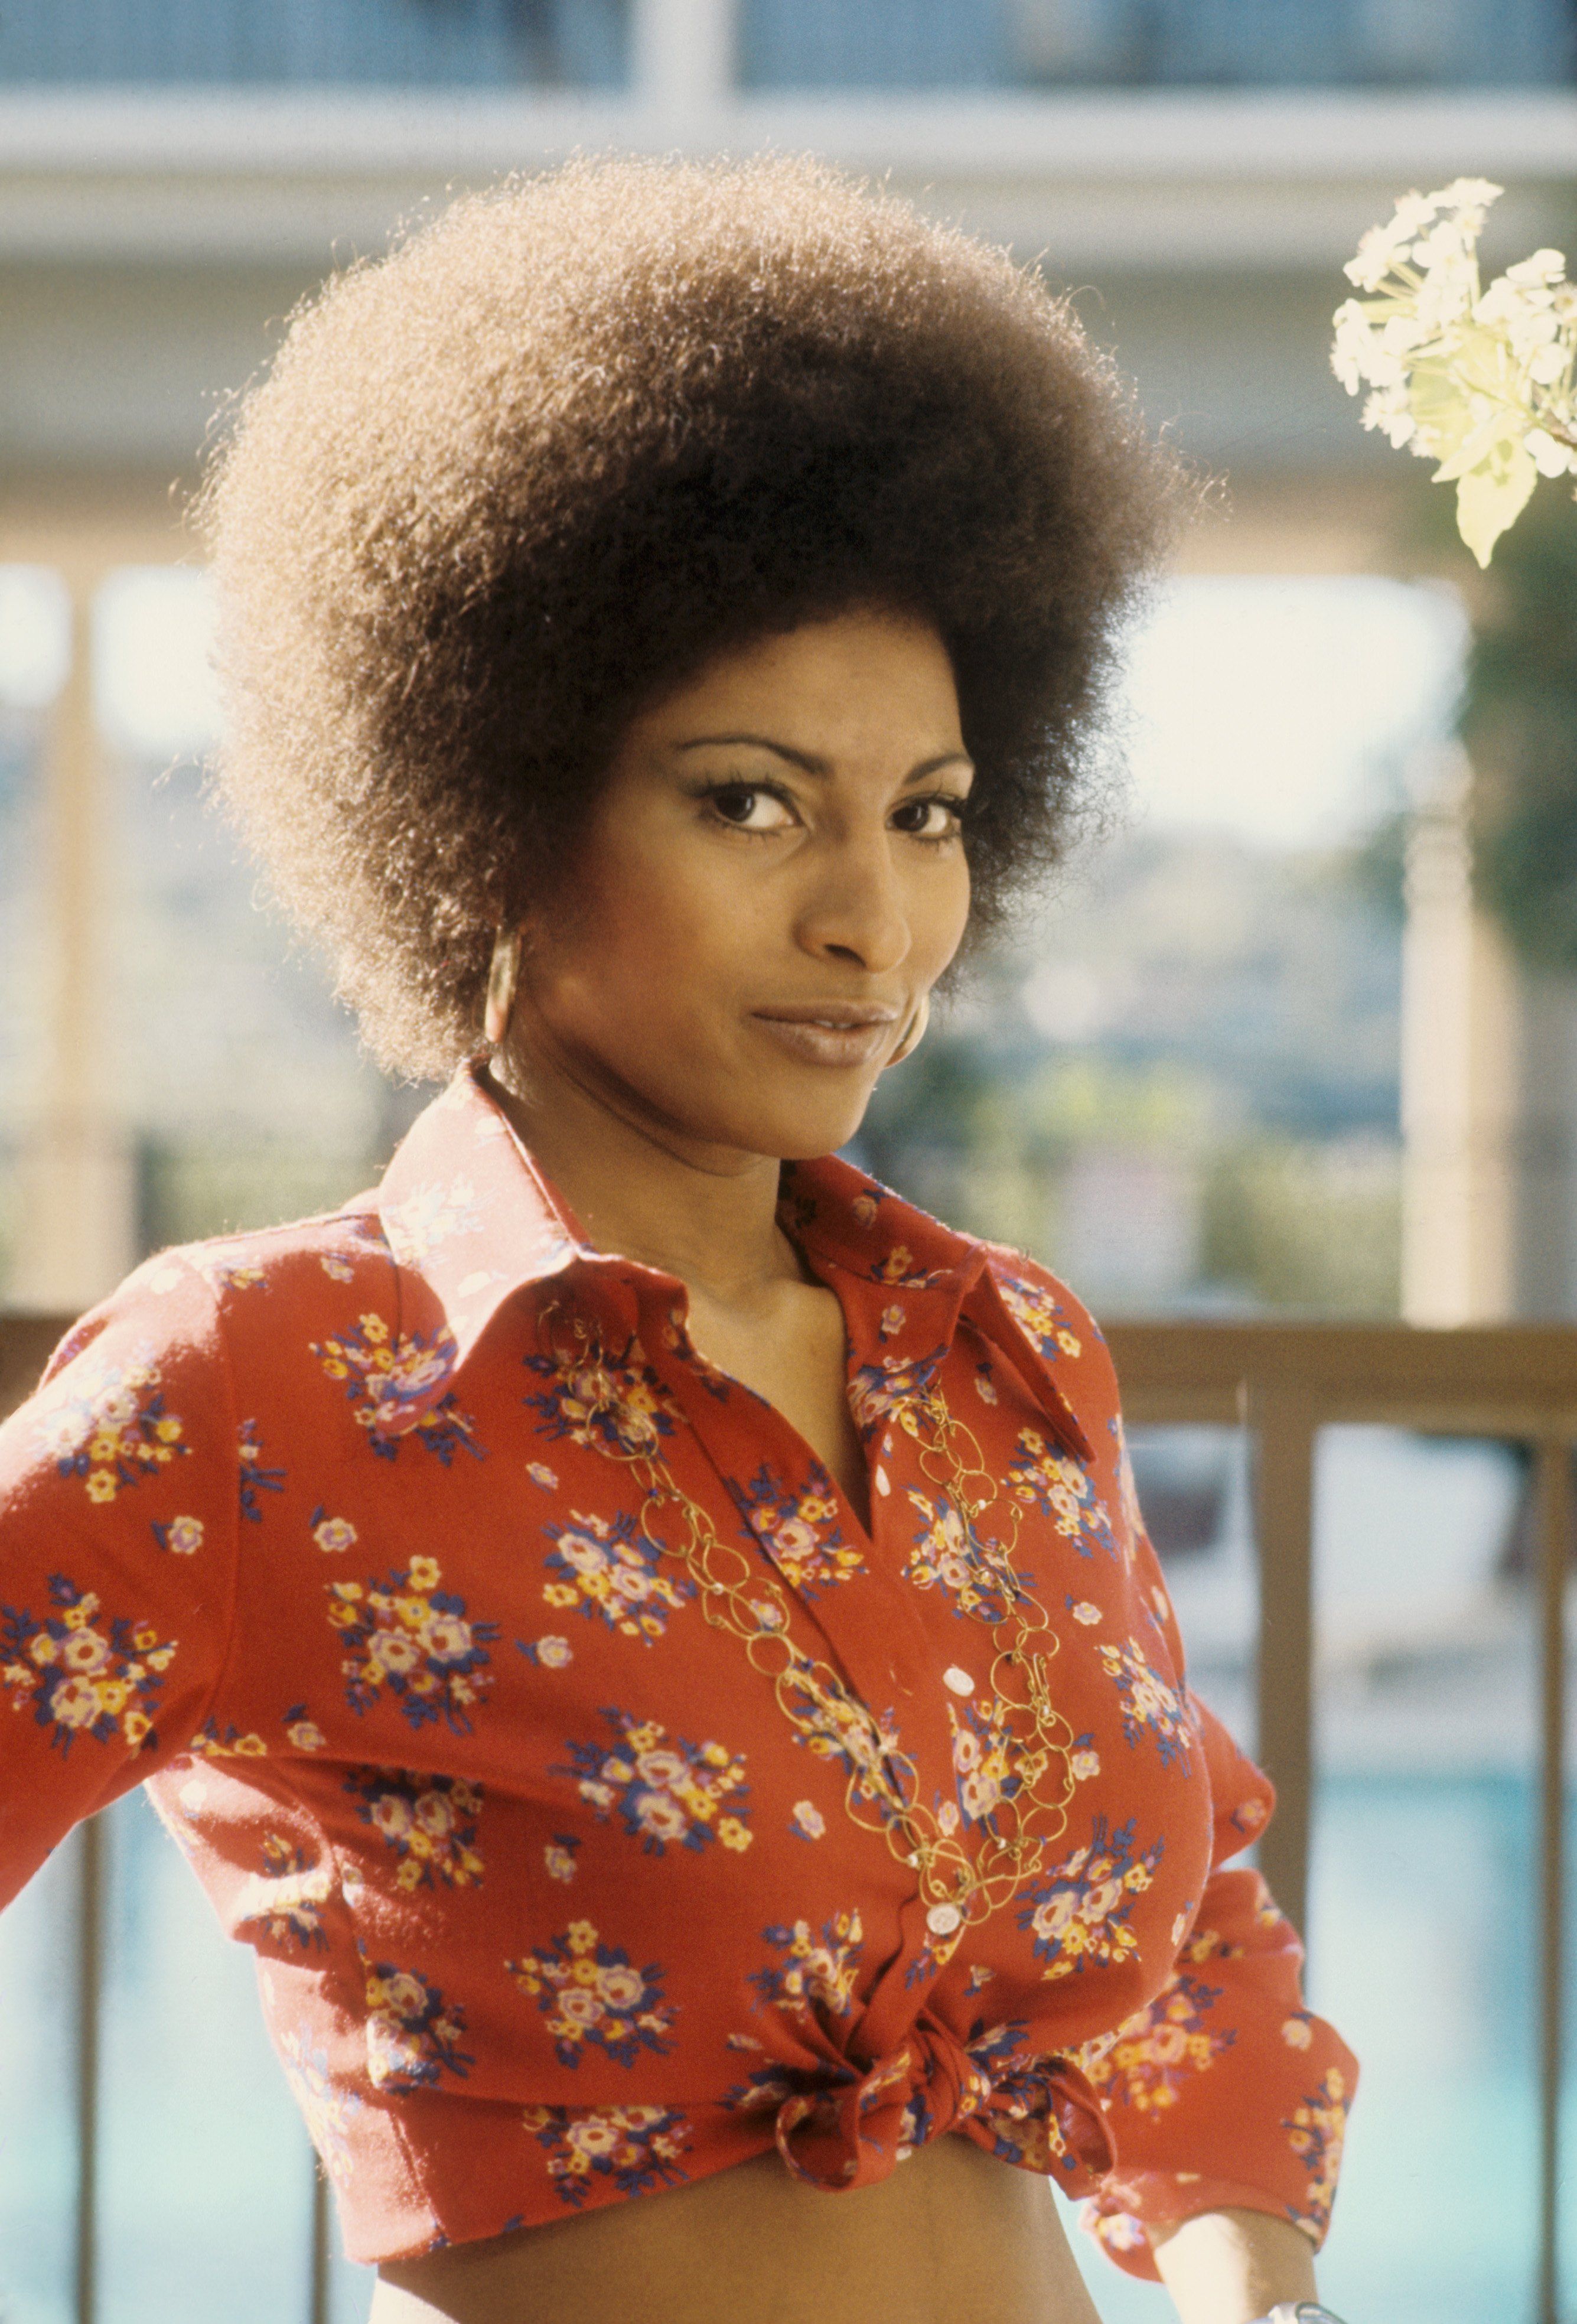 70s Hairstyles 18 Iconic Hair Trends Making a Comeback